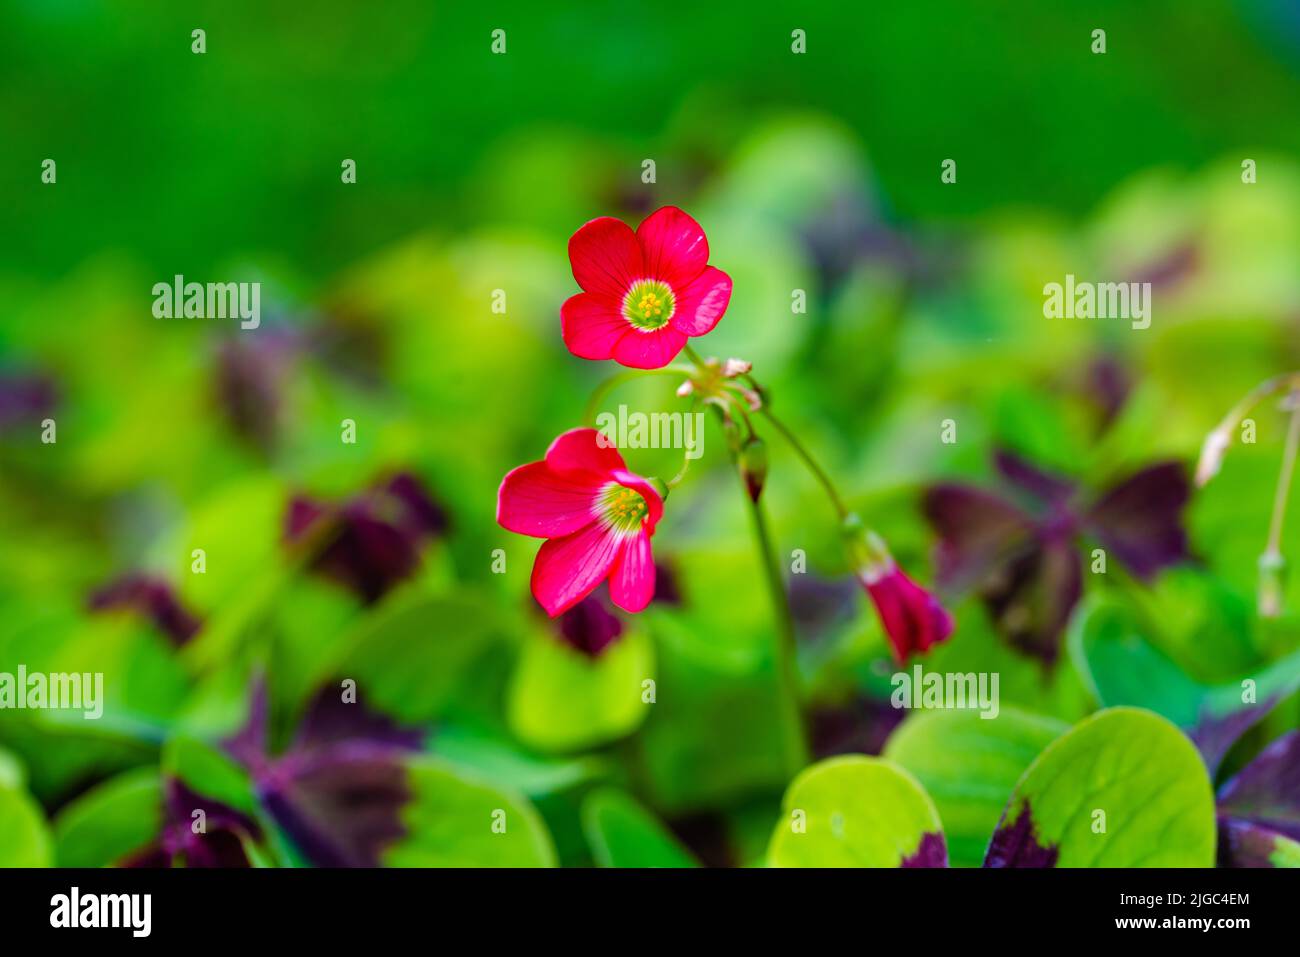 Oxalis is a large genus of flowering plants in the wood-sorrel family Oxalidaceae, comprising over 550 species. The genus occurs throughout most of th Stock Photo